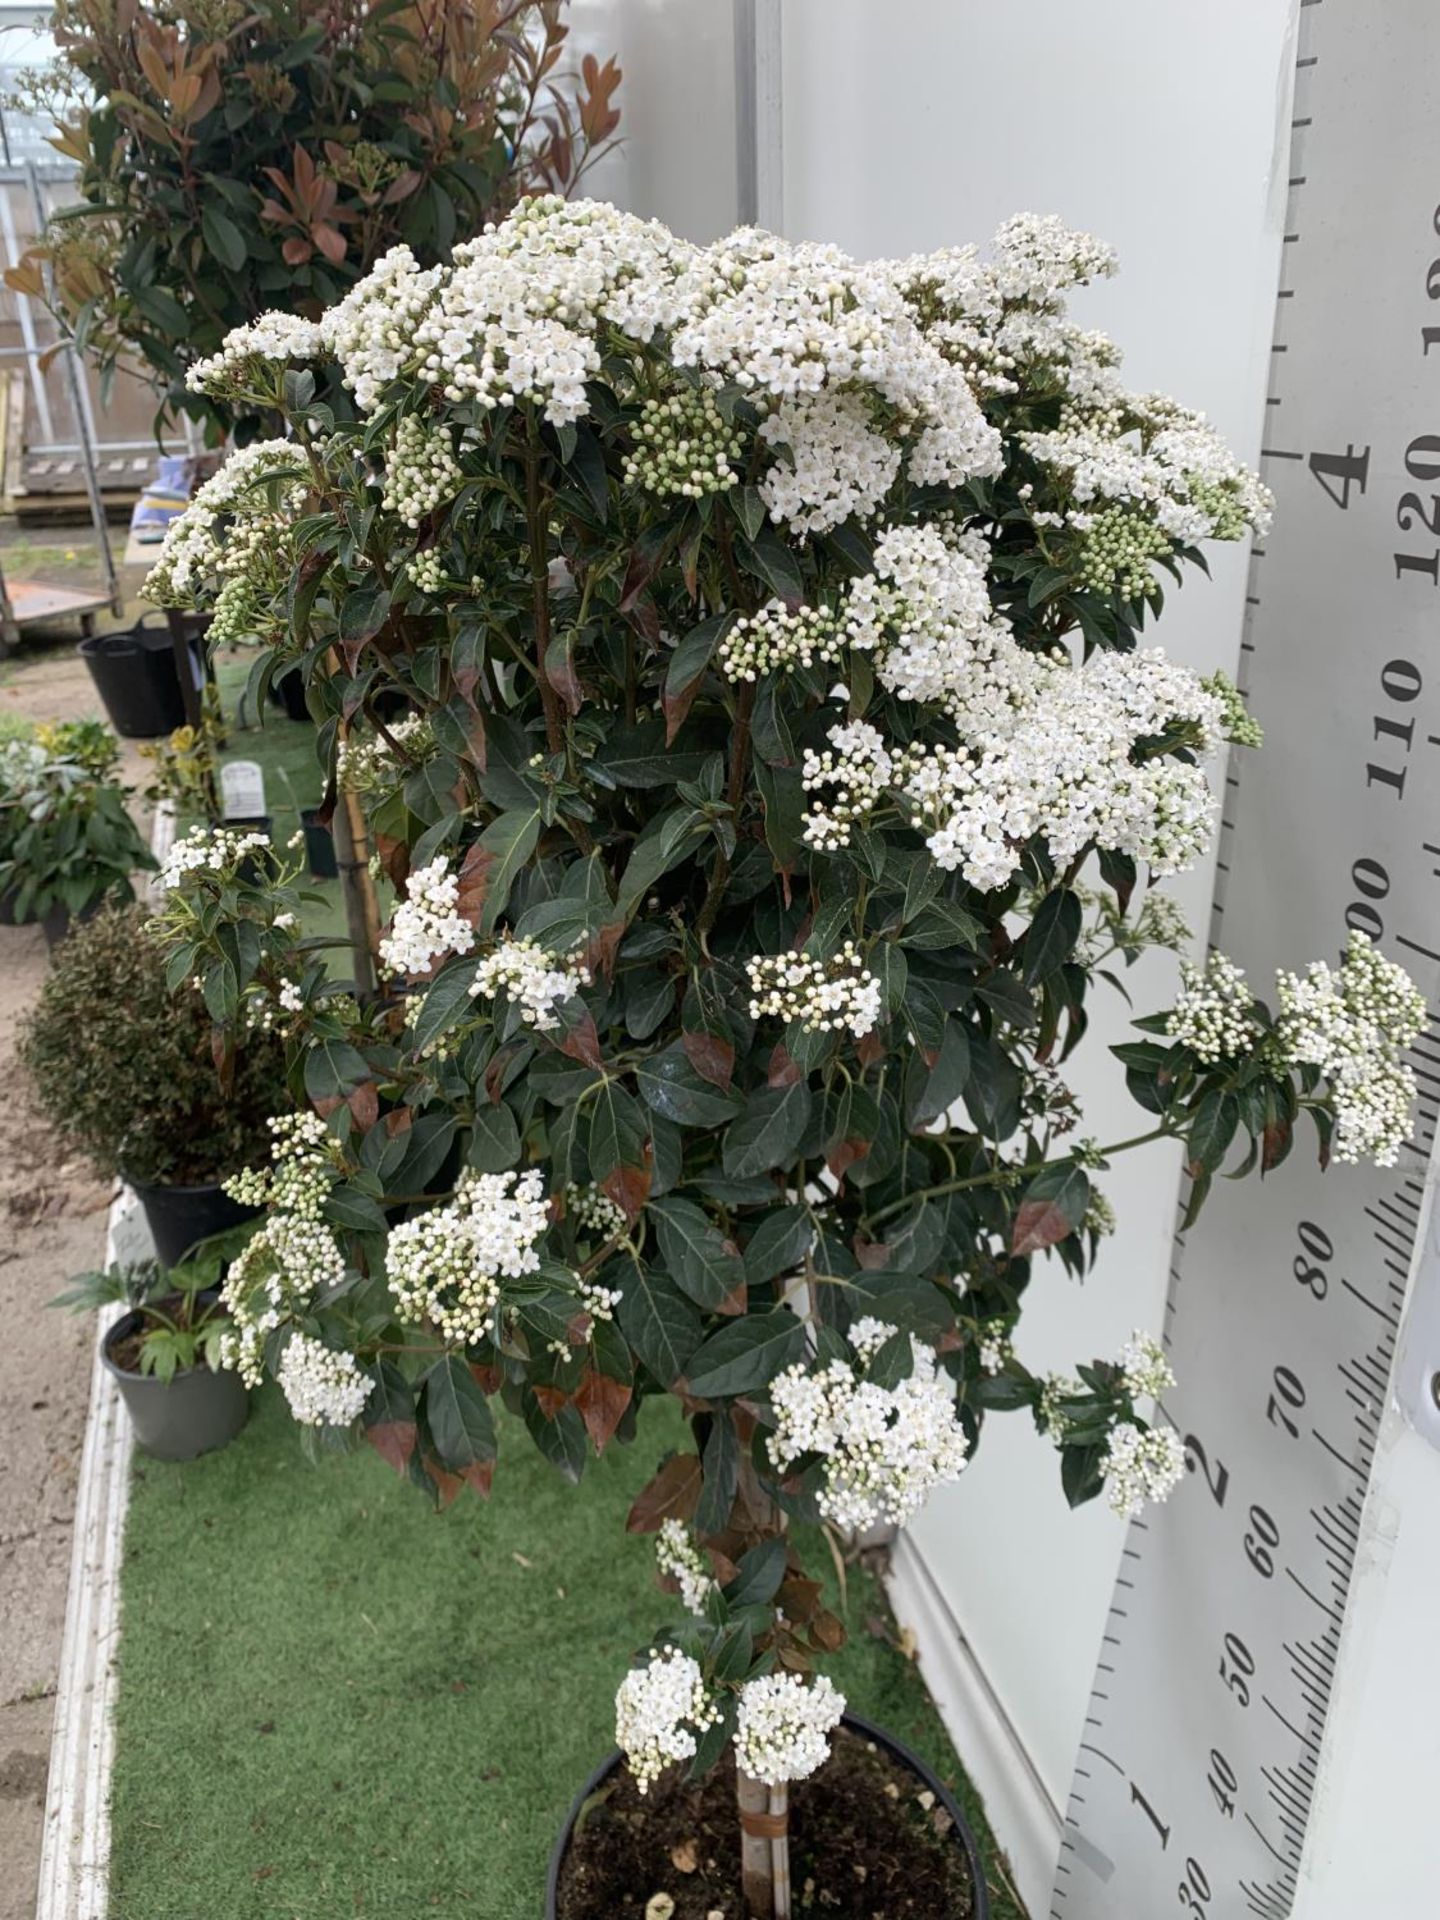 ONE VIBURNUM TINUS STANDARD TREE 'EVE PRICE' APPROX 130CM IN HEIGHT IN A 10 LTR POT PLUS VAT - Image 3 of 6